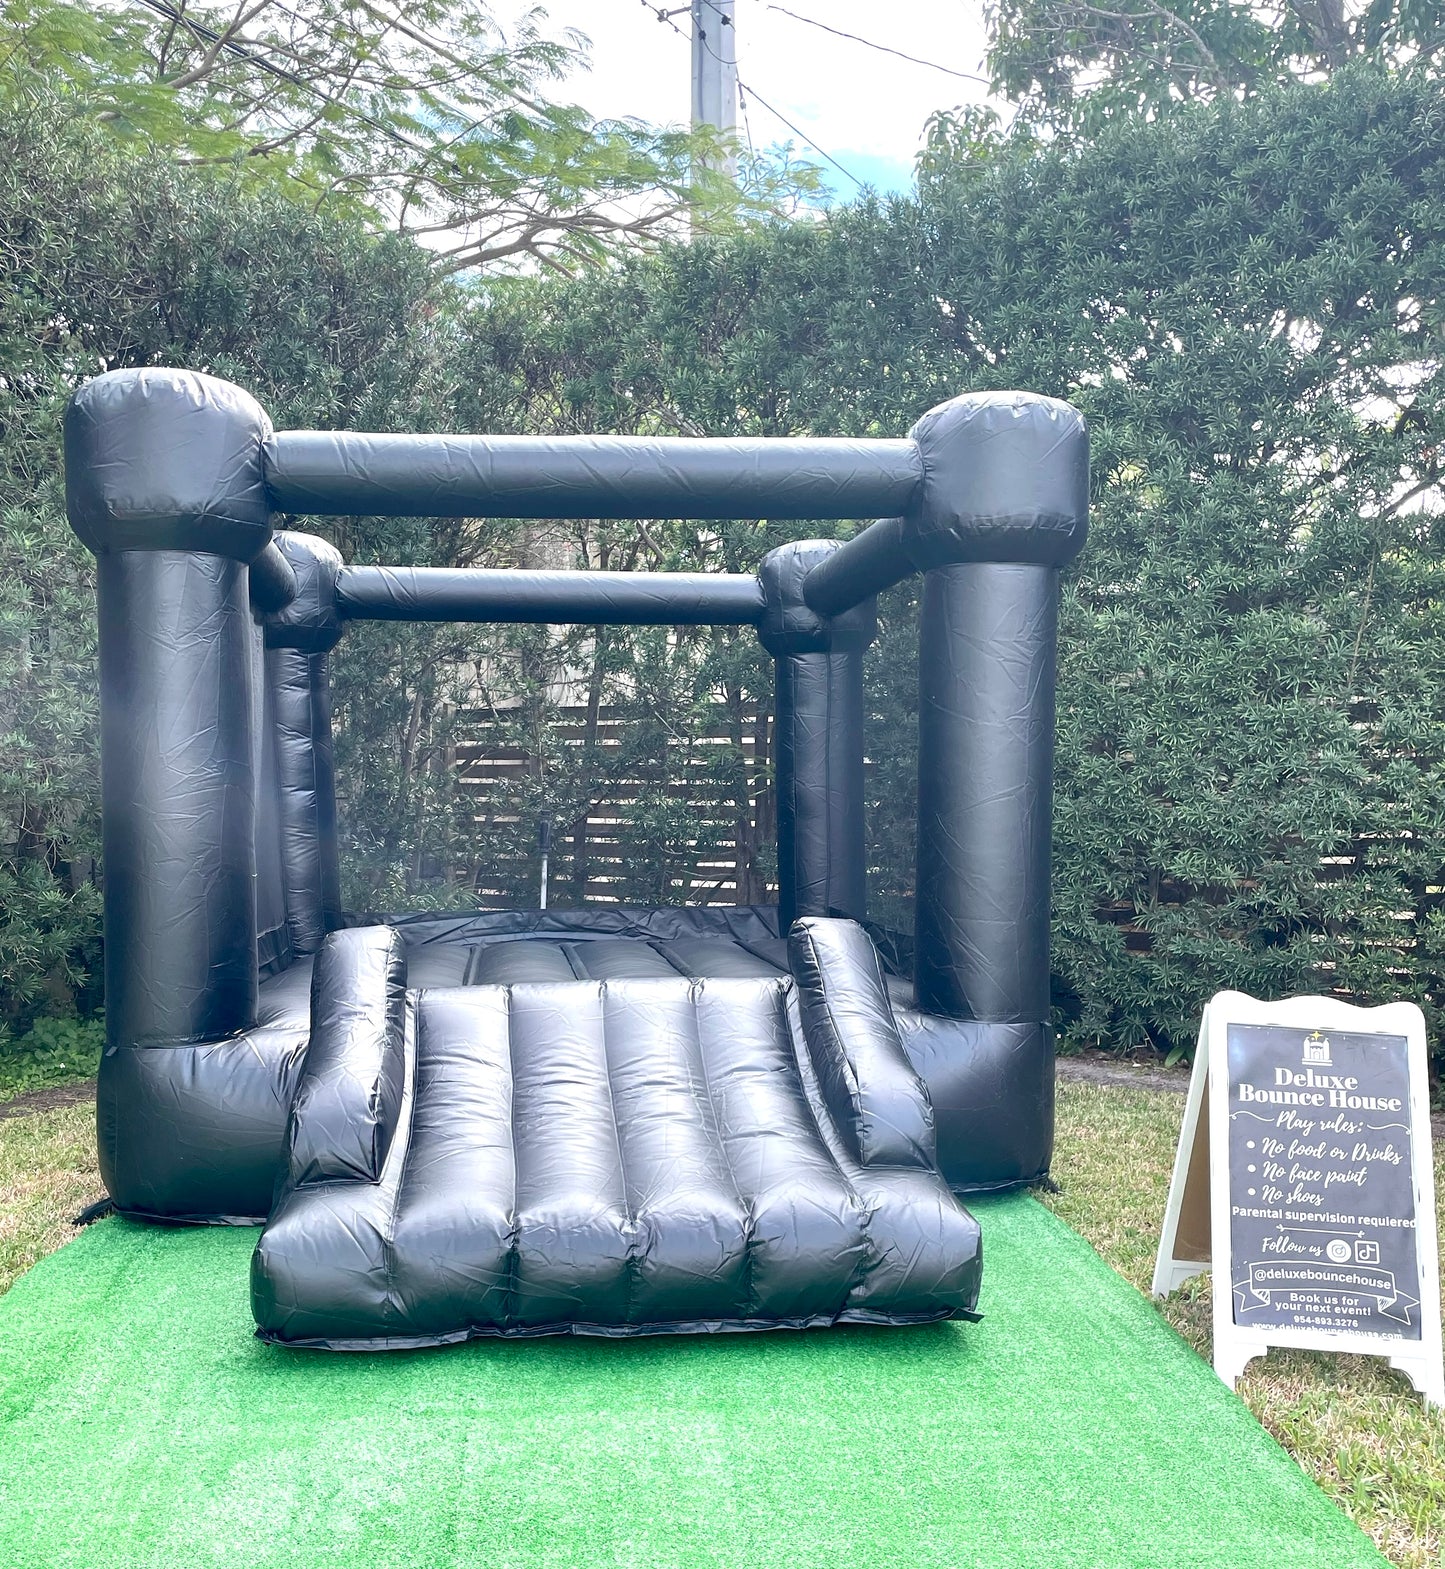 Black Bounce House | 8x11ft | For kids up to 7 years